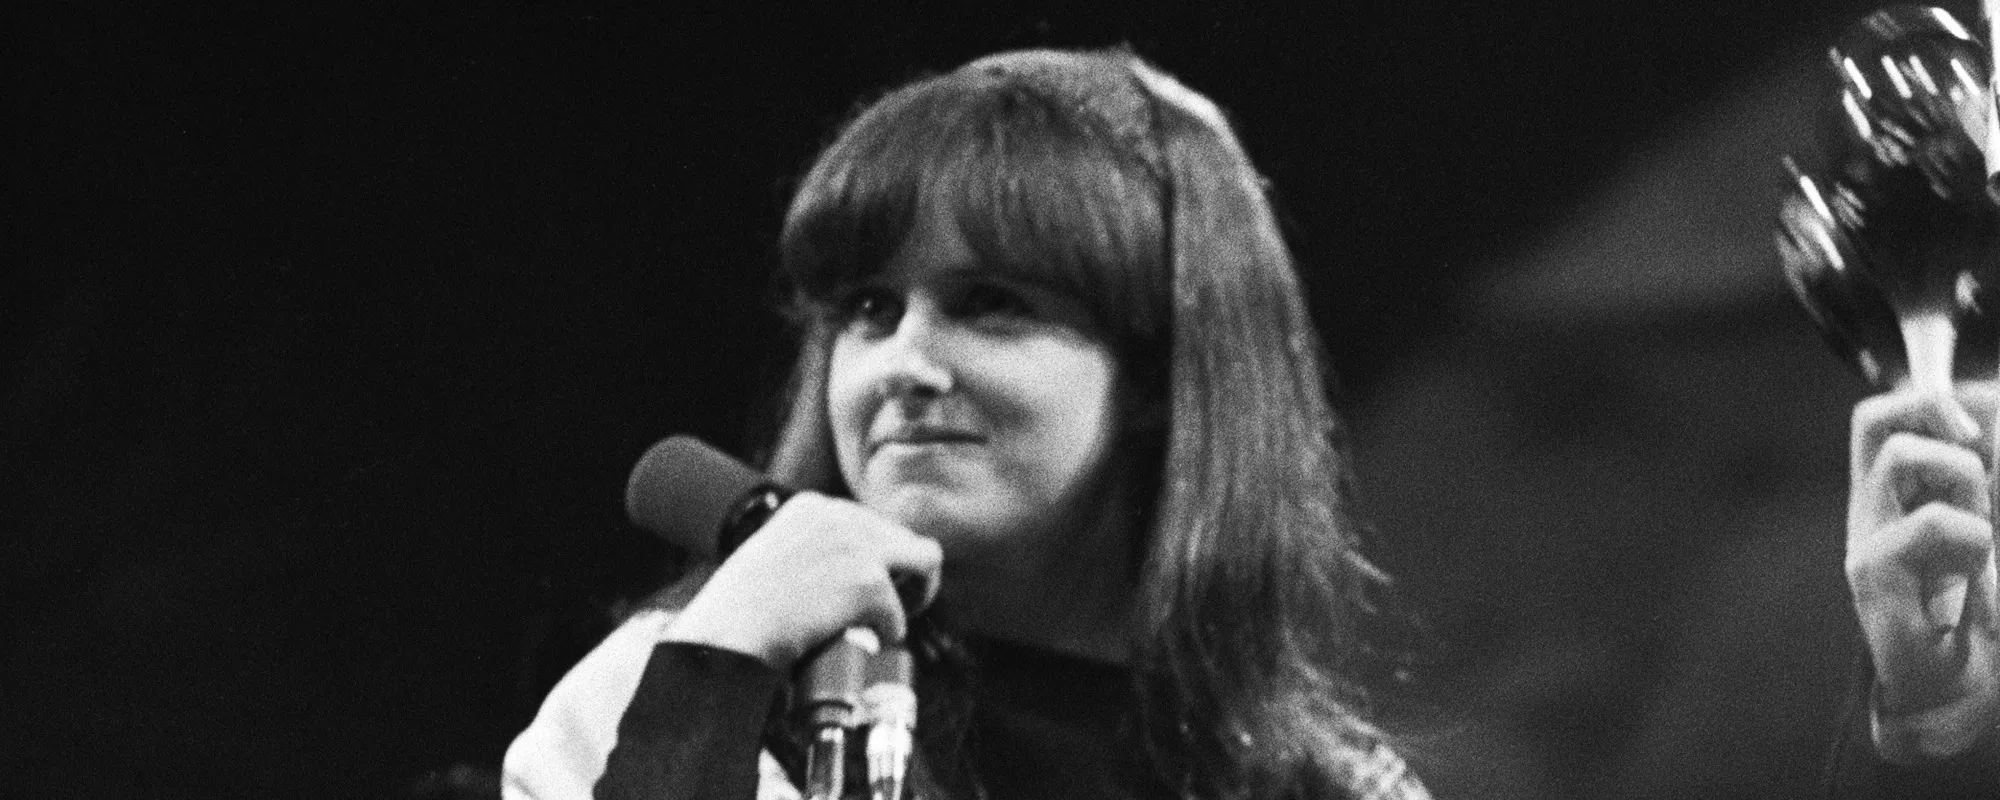 Grace Slick Timeline: The Woman Who Wrote “White Rabbit,” Became the Acid Queen and an Accomplished Painter